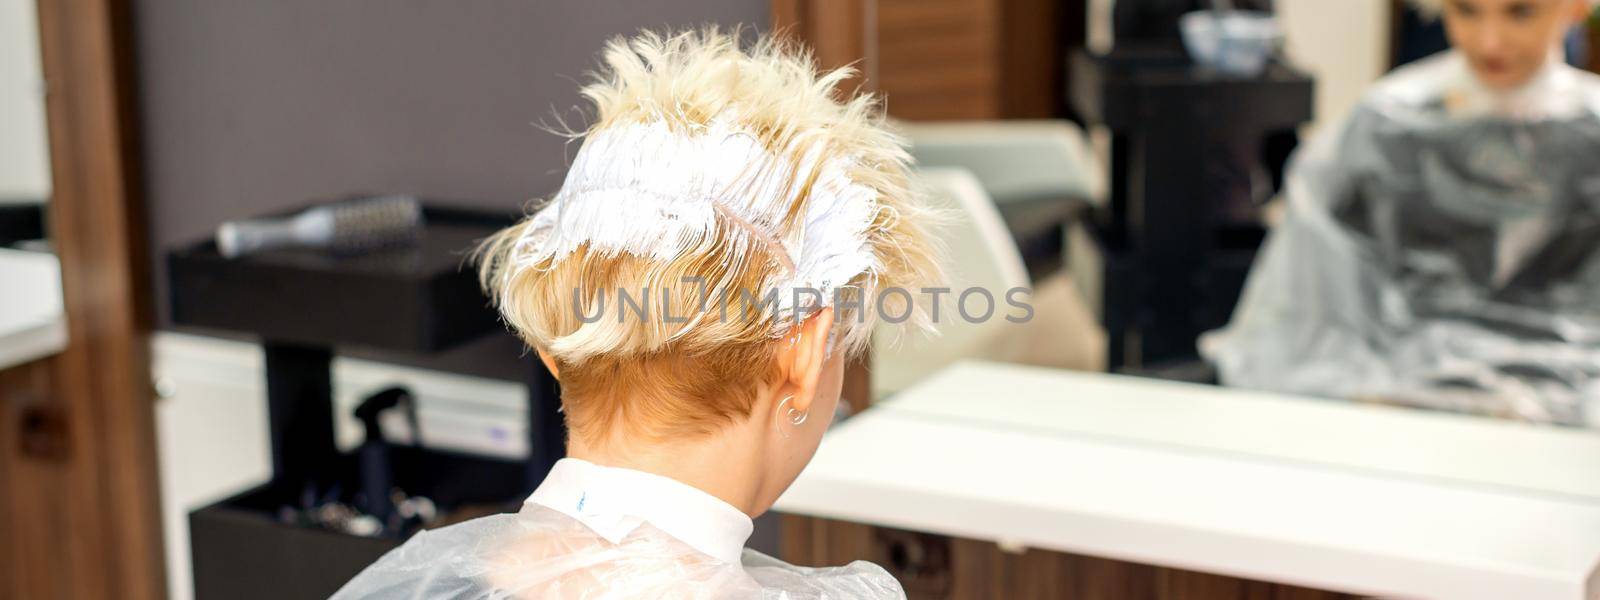 Coloring white hair with hair dye of the young caucasian blonde woman sitting at a hair salon, close up